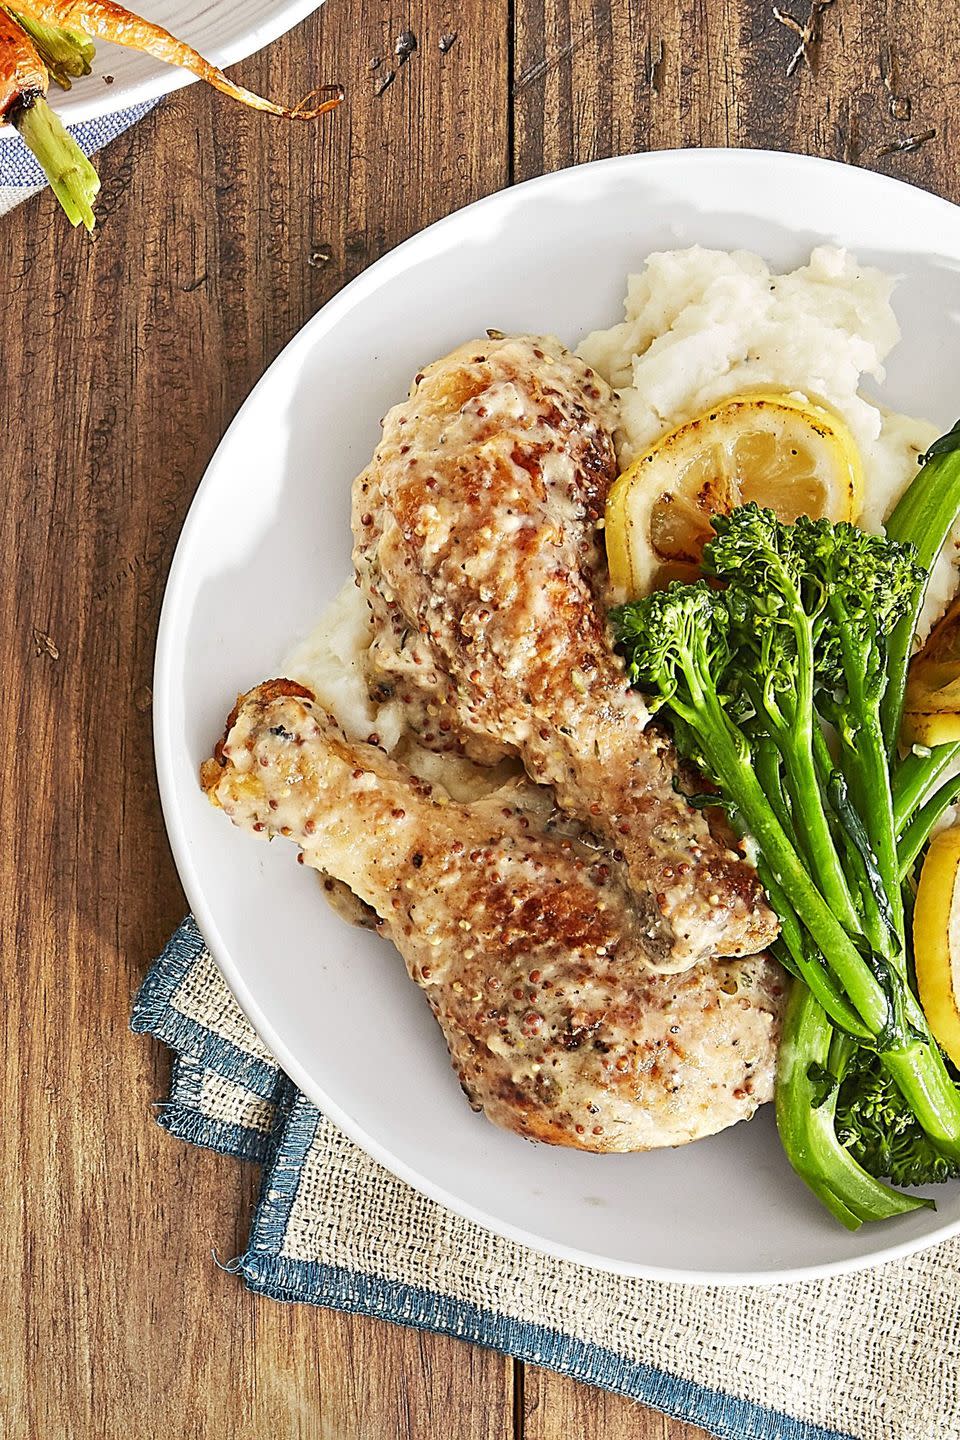 dijonsmothered chicken legs with broccolini